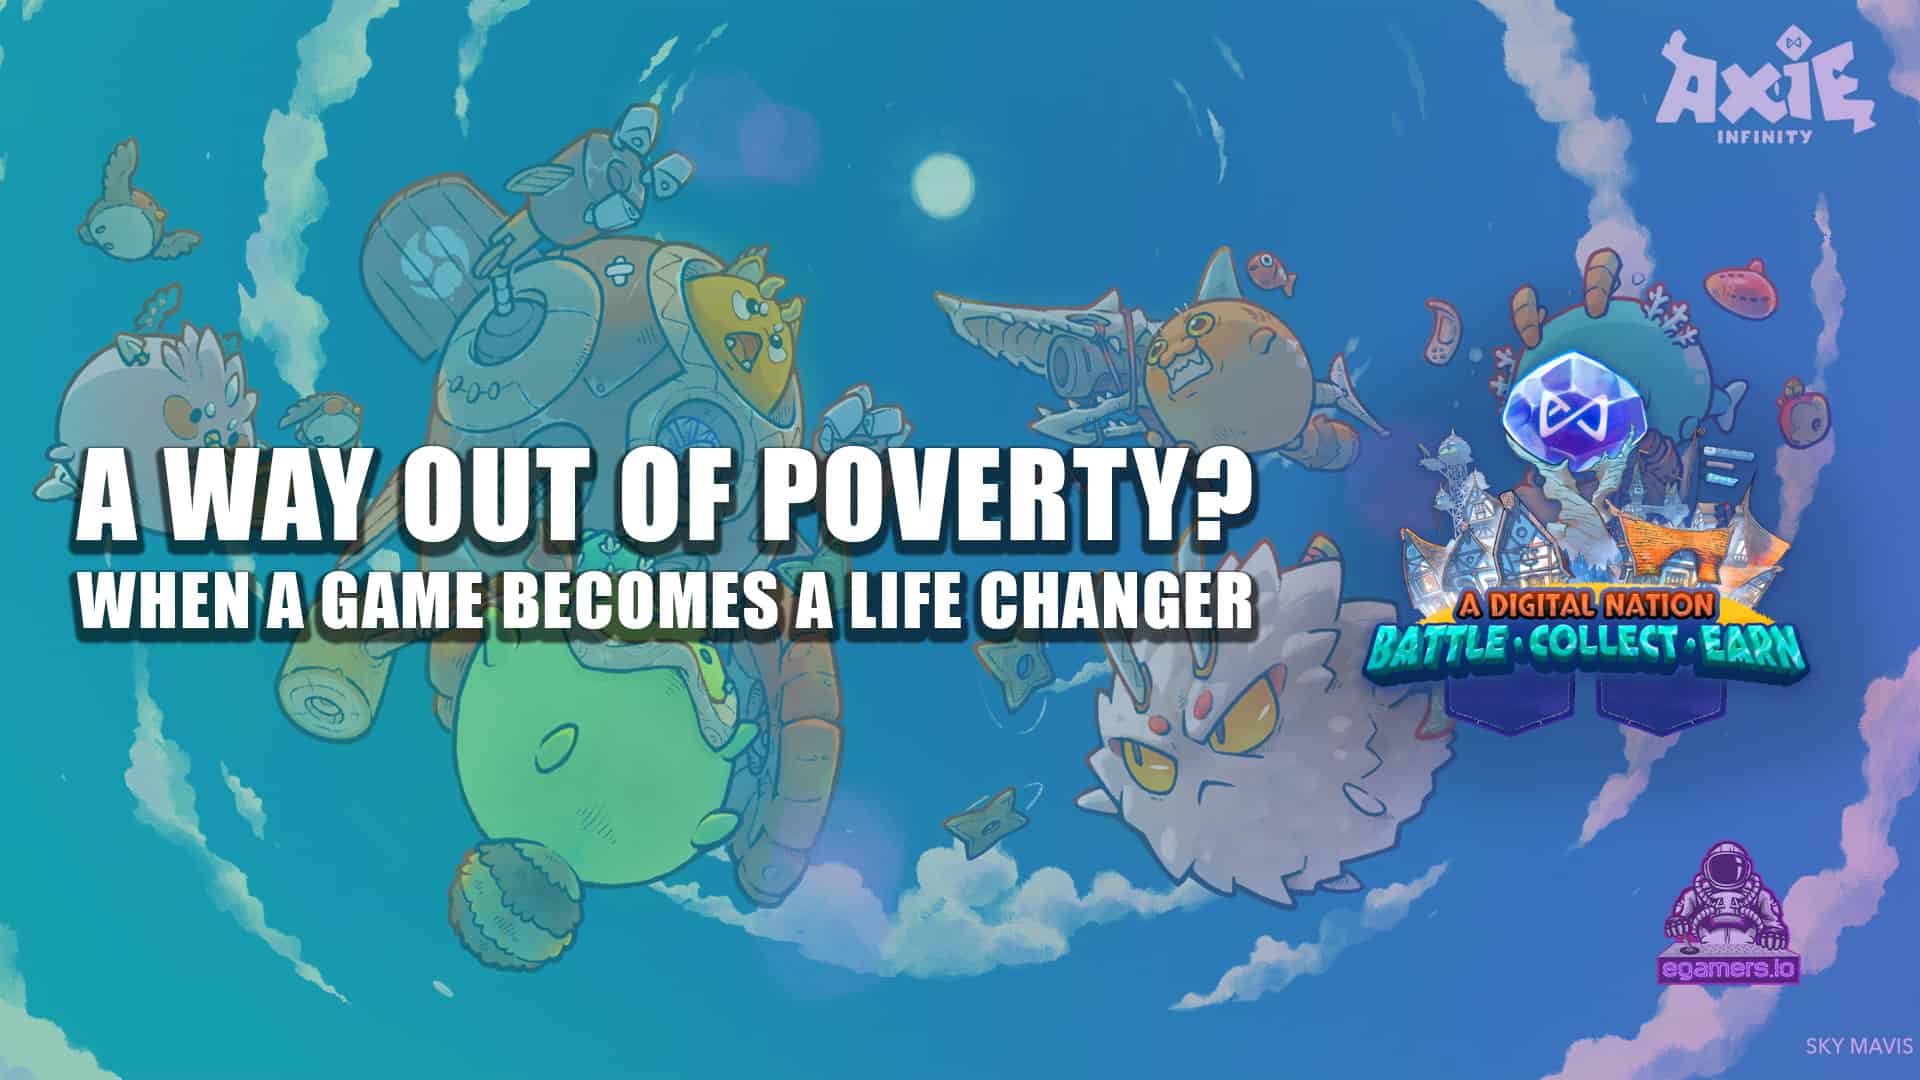 Axie Infinity: A Game or a Way Out of Poverty?